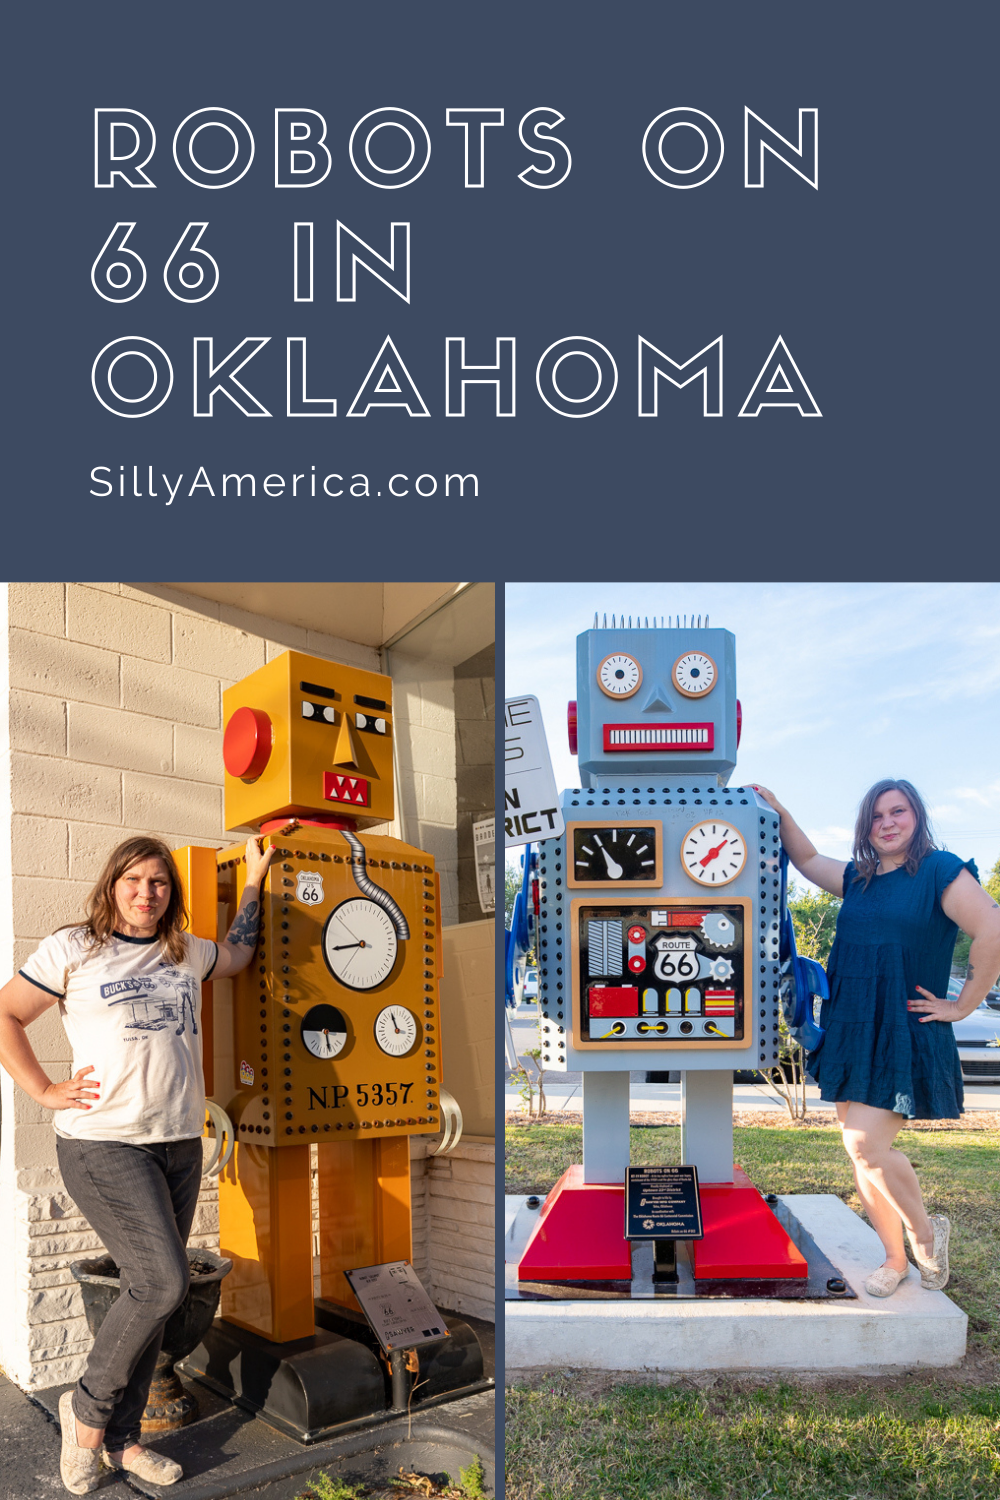 Robots on 66 is a new initiative kickstarted by the founder of Buck Atom’s Cosmic Curios in Tulsa, Oklahoma. The project aims to add fun robot statues to popular Oklahoma Route 66 attractions as a lead up to the Route 66 centennial in 2026. Find two of these Route 66 roadside attractions in Oklahoma.  #RoadTrips #RoadTripStop #Route66 #Route66RoadTrip #OklahomaRoute66 #Oklahoma #OklahomaRoadTrip #OklahomaRoadsideAttractions #RoadsideAttractions #RoadsideAttraction #RoadsideAmerica #RoadTrip